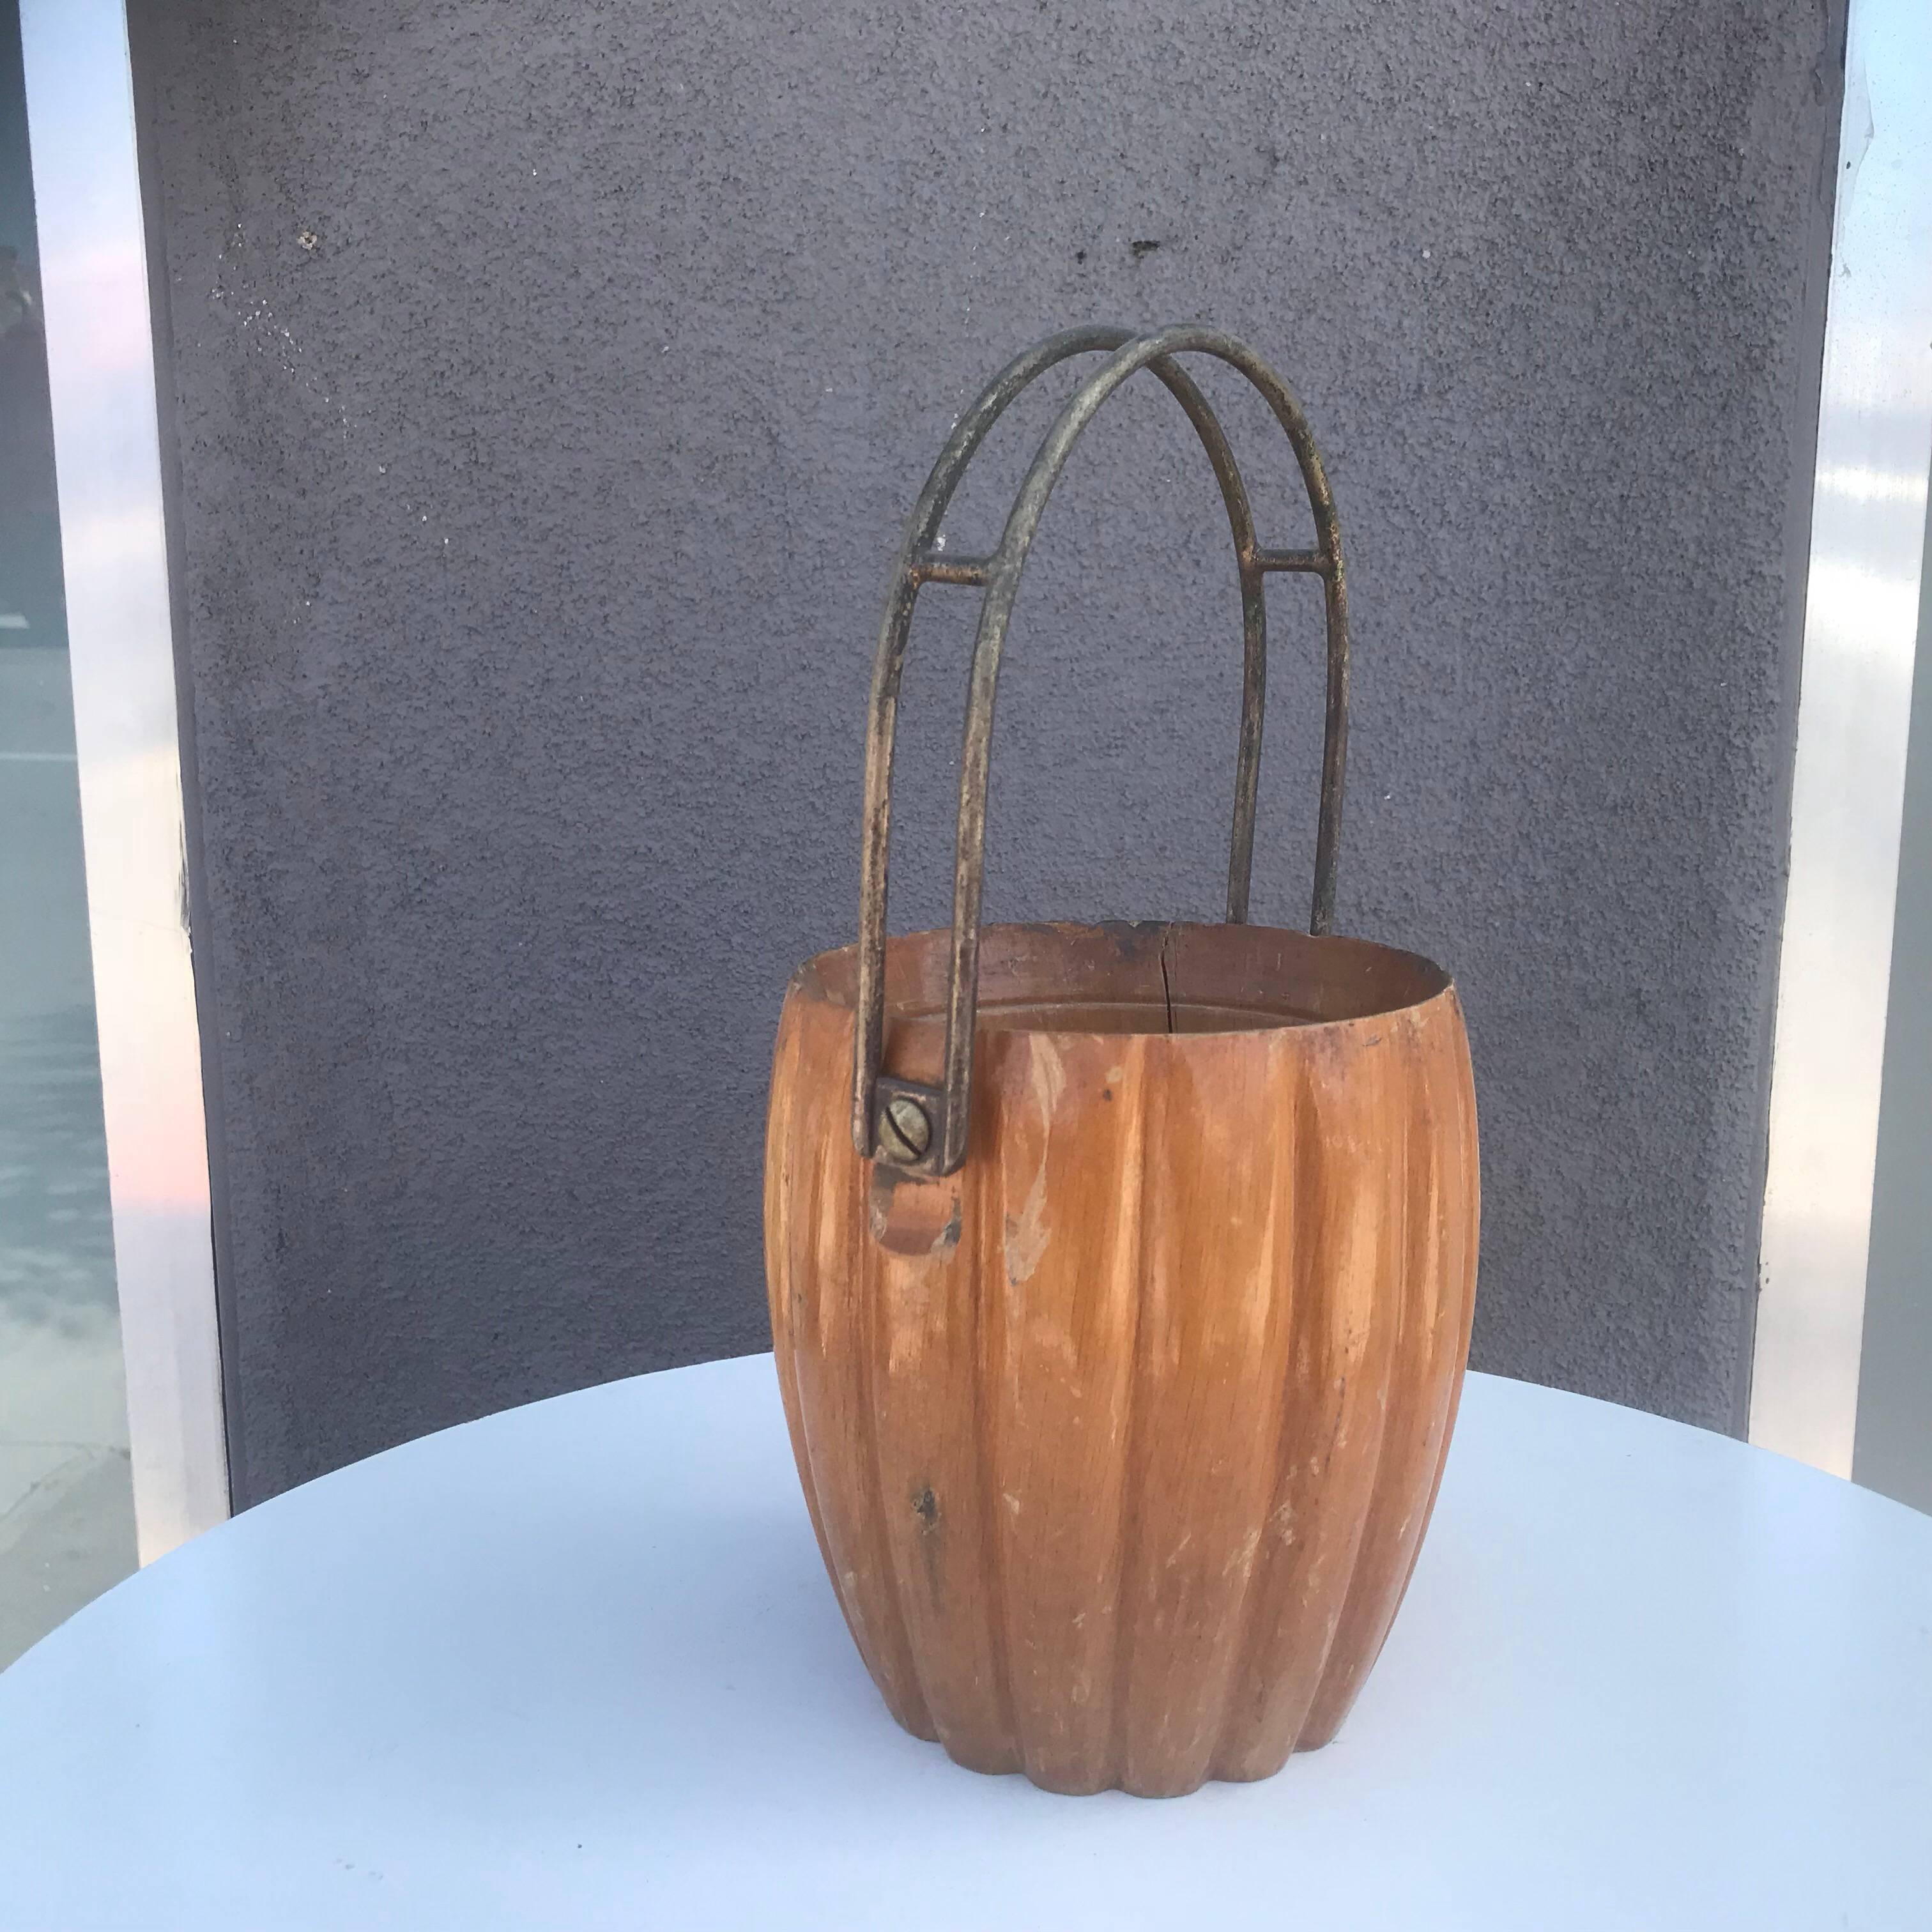 For your consideration a vintage Mid-Century Modern Macabo Cusano wood basket, 
circa 1950s.
by Aldo Tura Macabo Cusano.
Original vintage condition, refer to images.
  